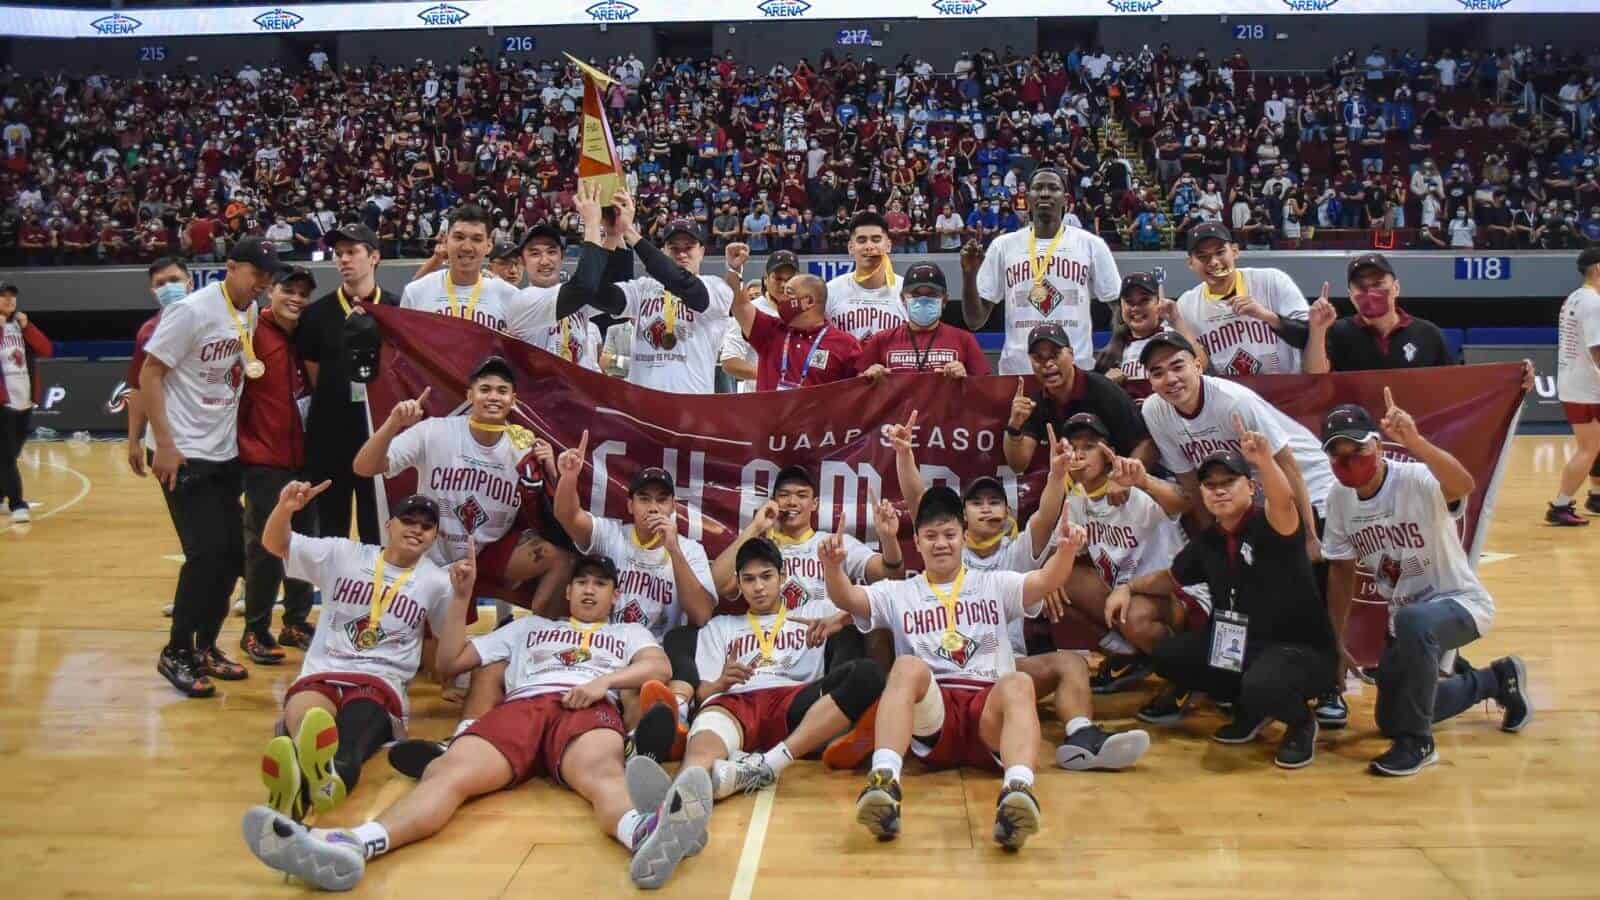 A group of basketball players posing for a picture after UP Maroons end 36-year title drought by winning the UAAP men's basketball crown over Ateneo.